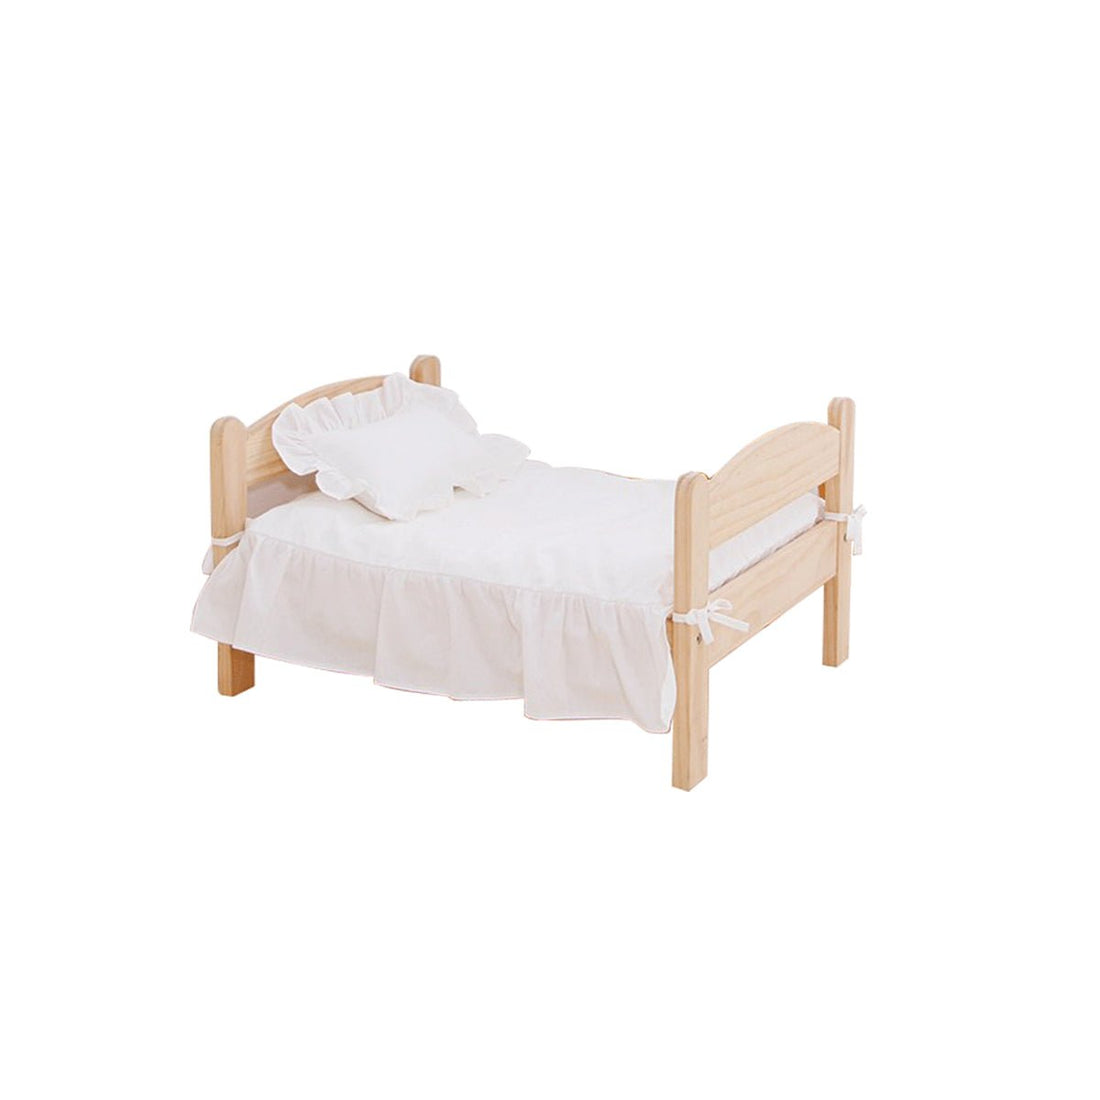 Sweet Dream Natural Wood Pet Bed With White Quilt Set - 0cm